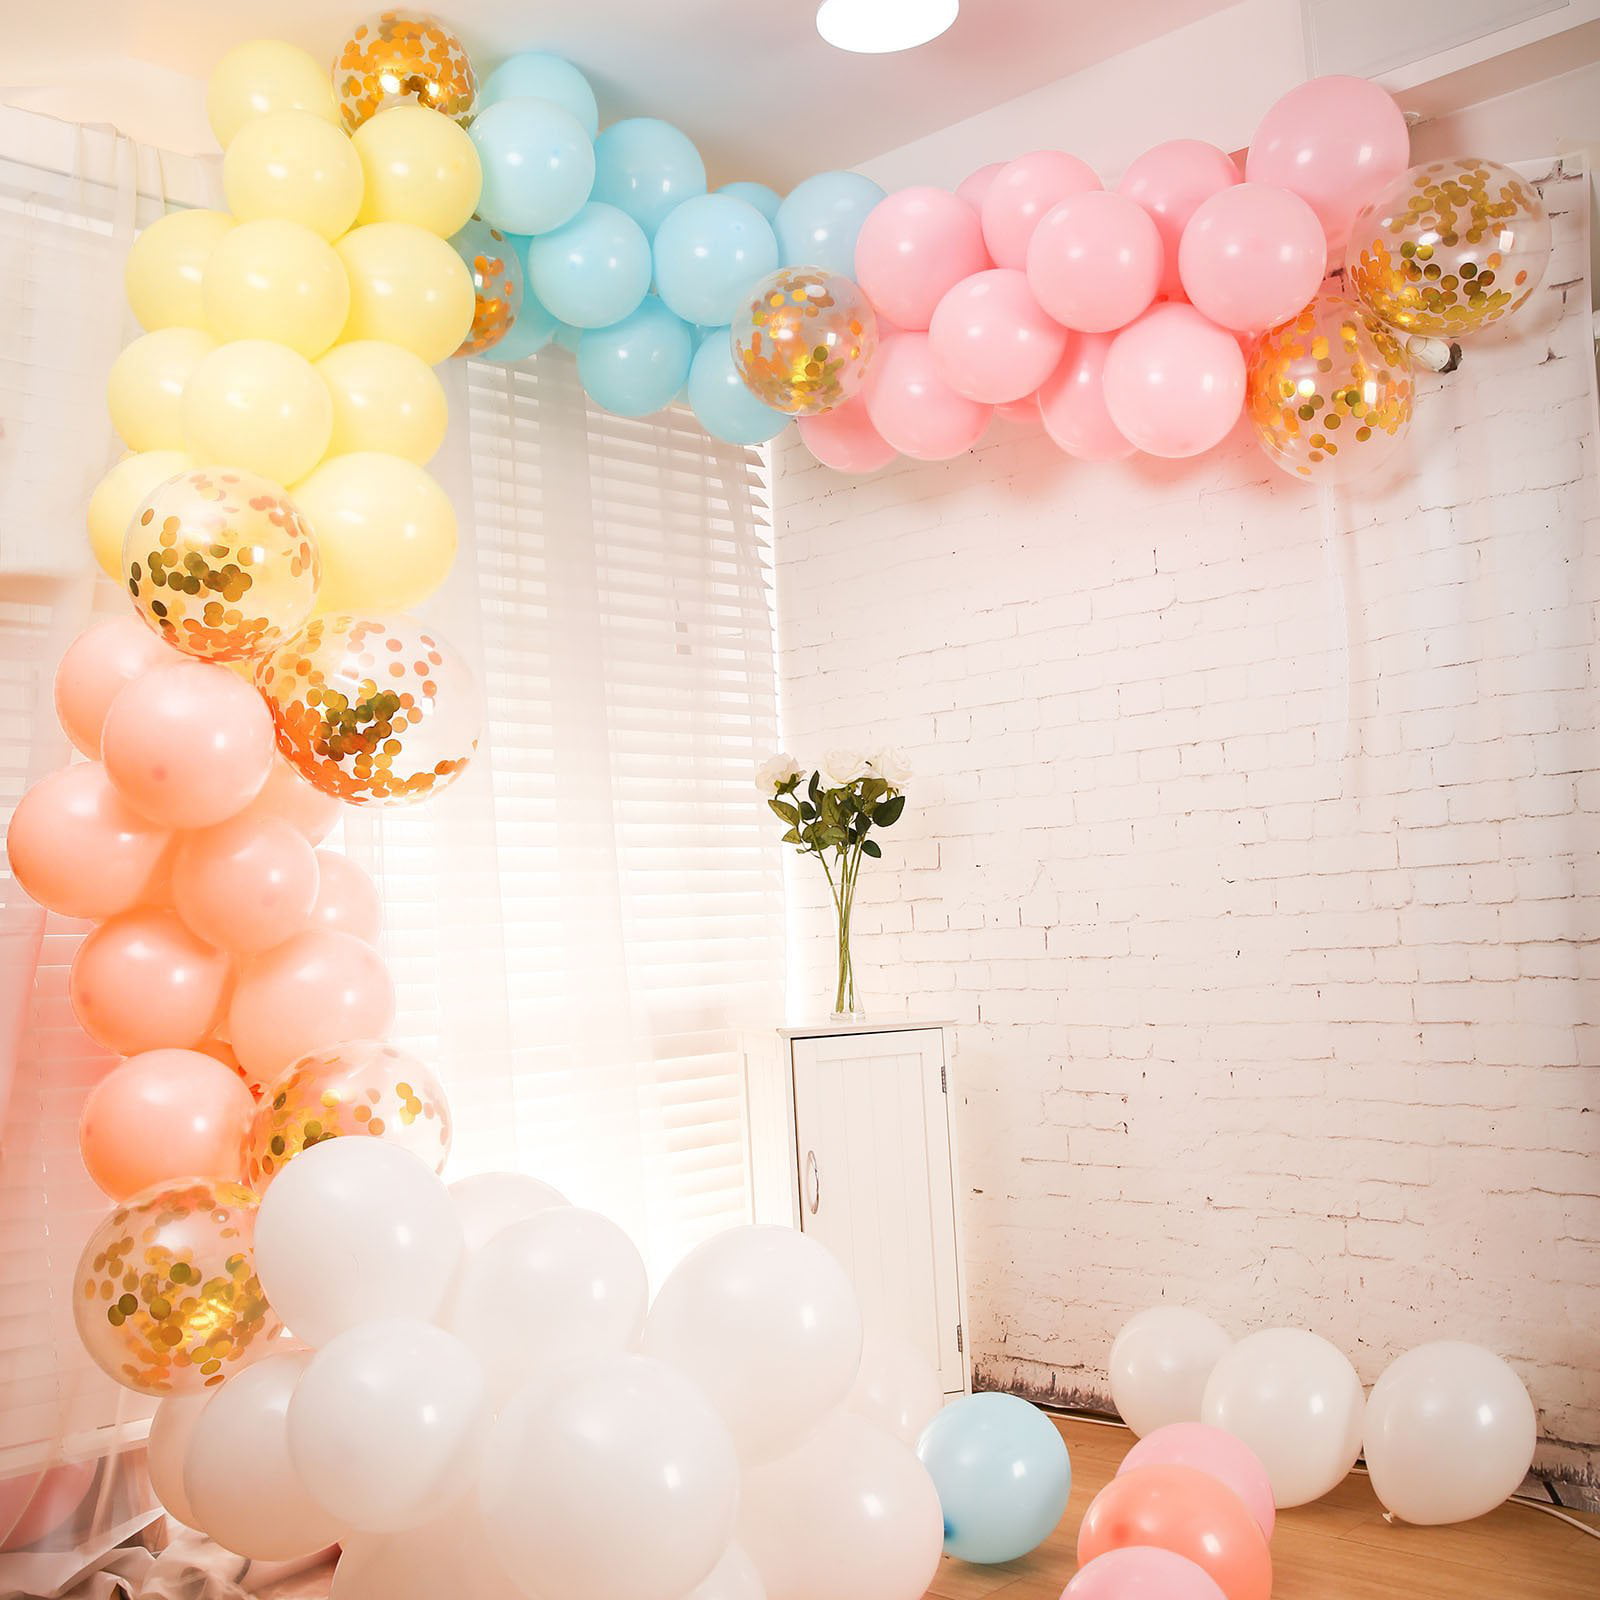 Details about   Pastel White Grey Balloons Garland Arch Kit Birthday Party Wedding Decoration 